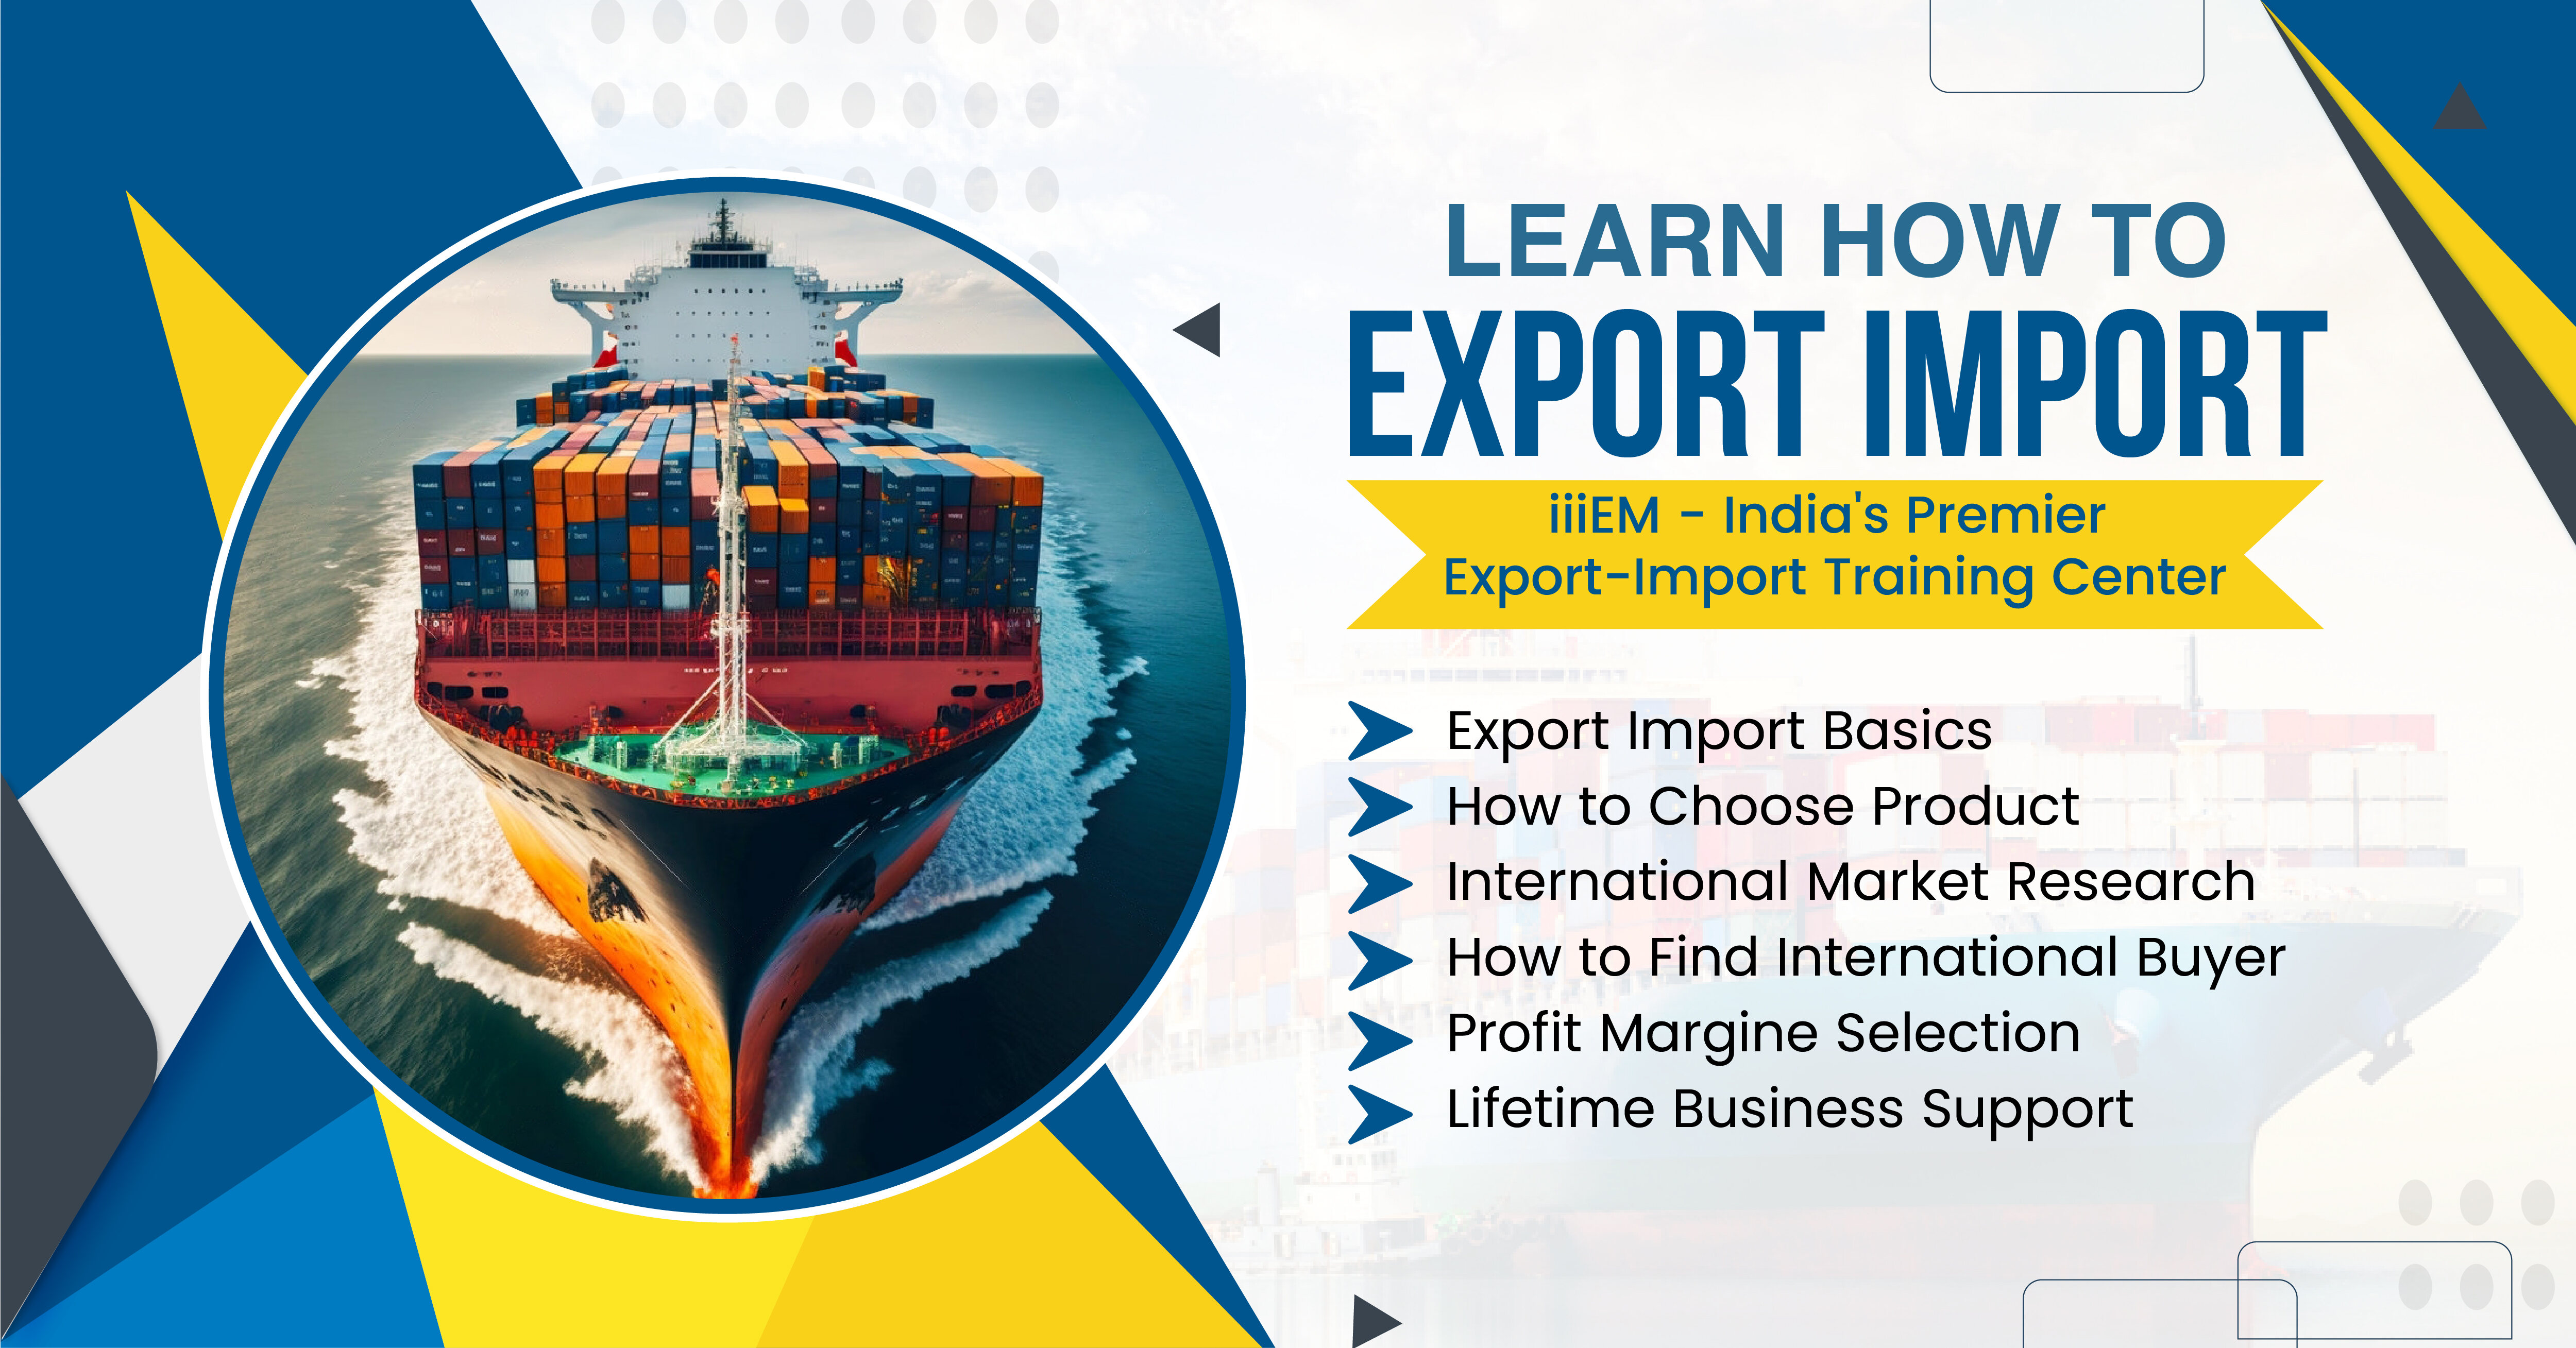 Enroll Now! Learn How to Export-Import with Certified Course Training in Rajkot, Rajkot, Gujarat, India